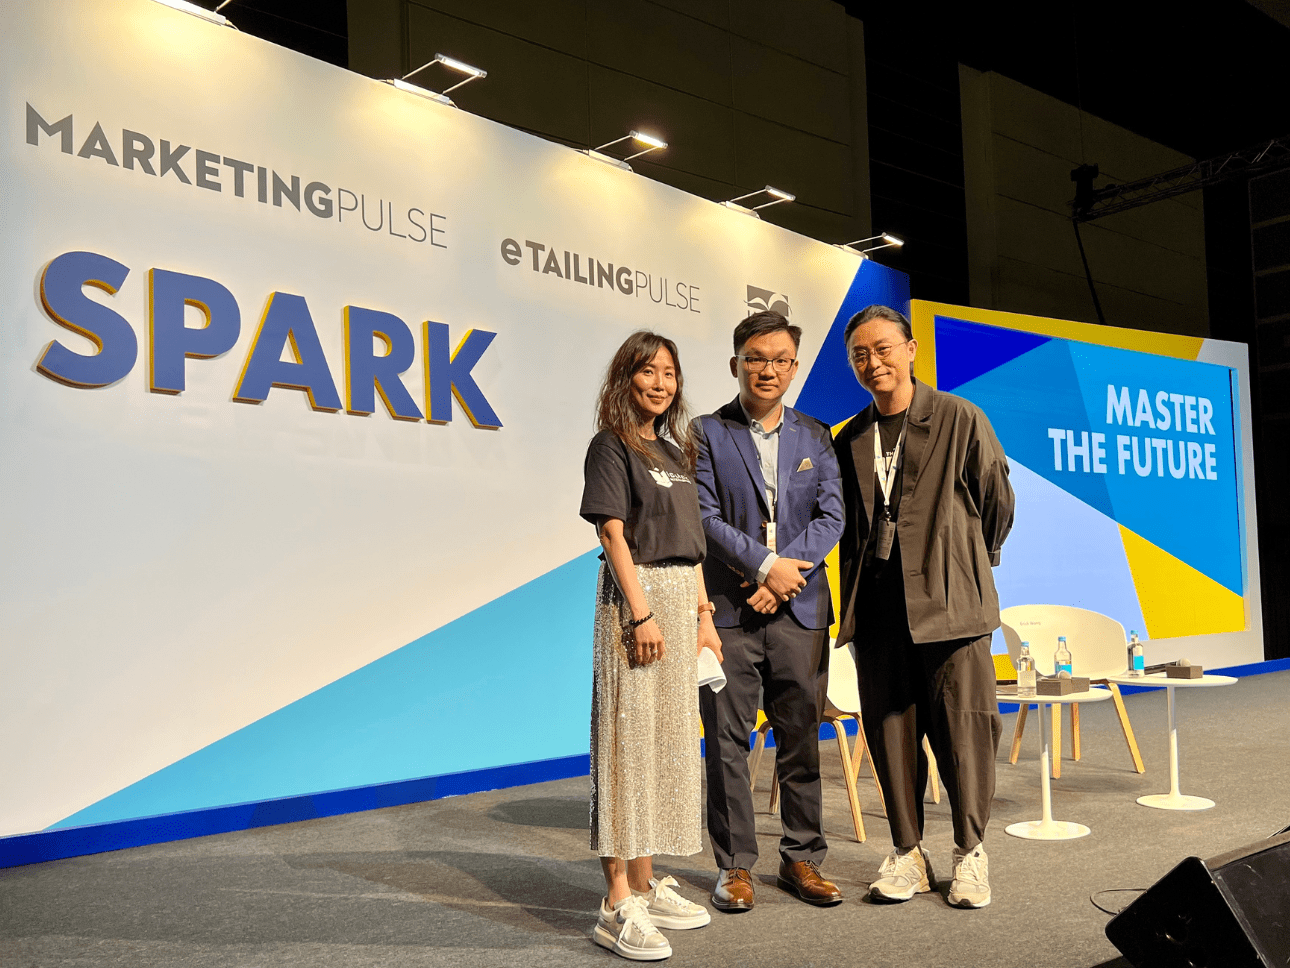 [MarketingPulse X eTailingPulse] iClick’s Exclusive Workshop Sees Full House and Empowers Marketers to Target Chinese Travelers in a New Exciting Way!